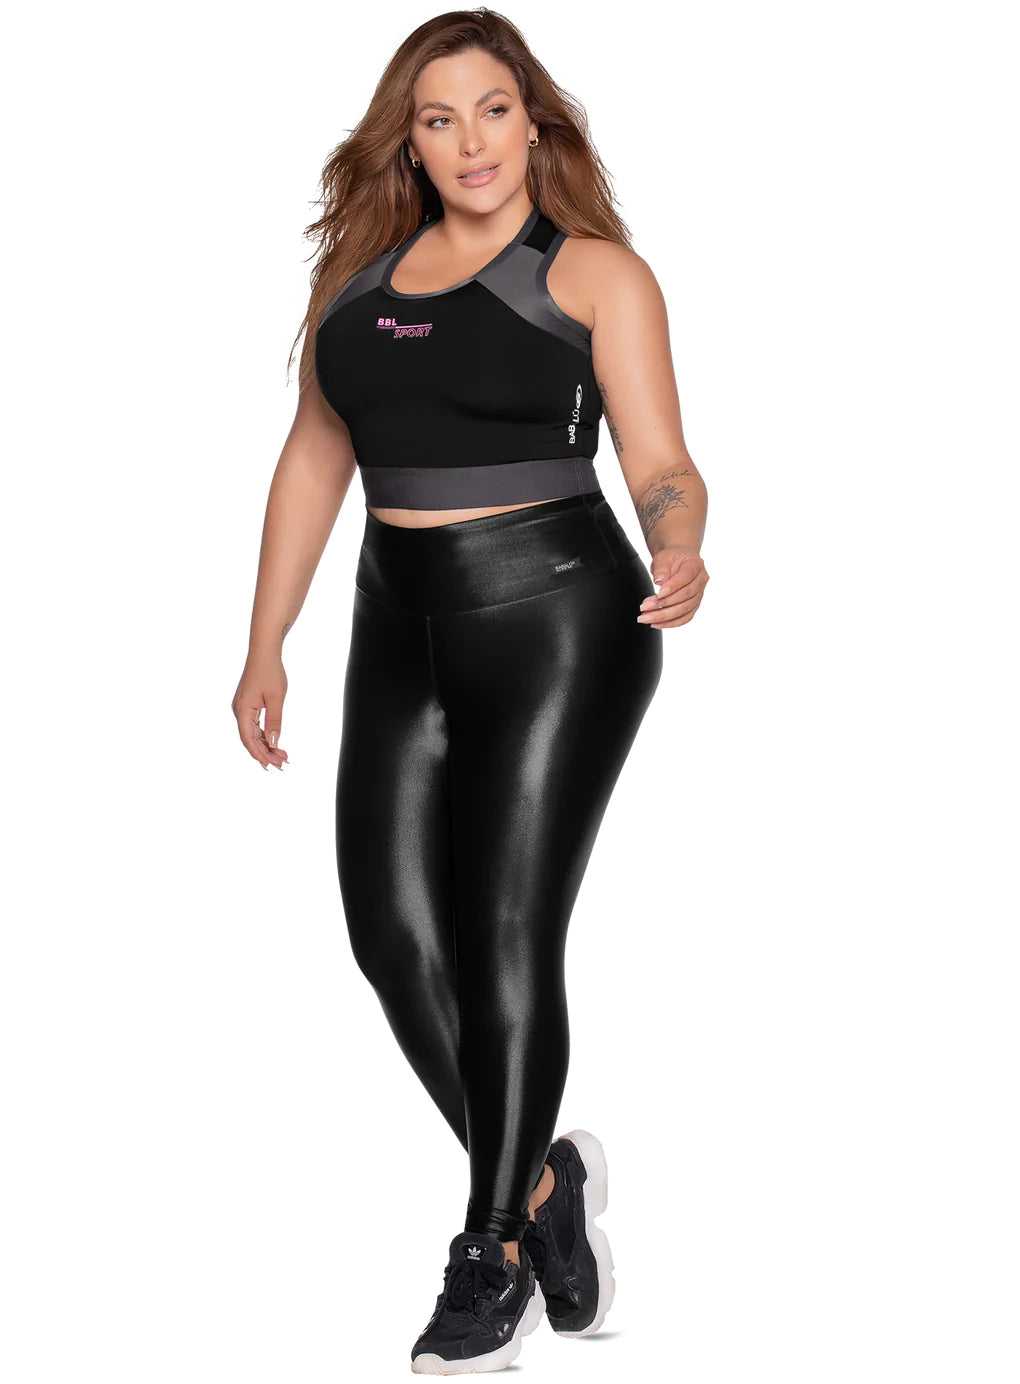 Curvy Leather Look Leggings with Wide Waistband